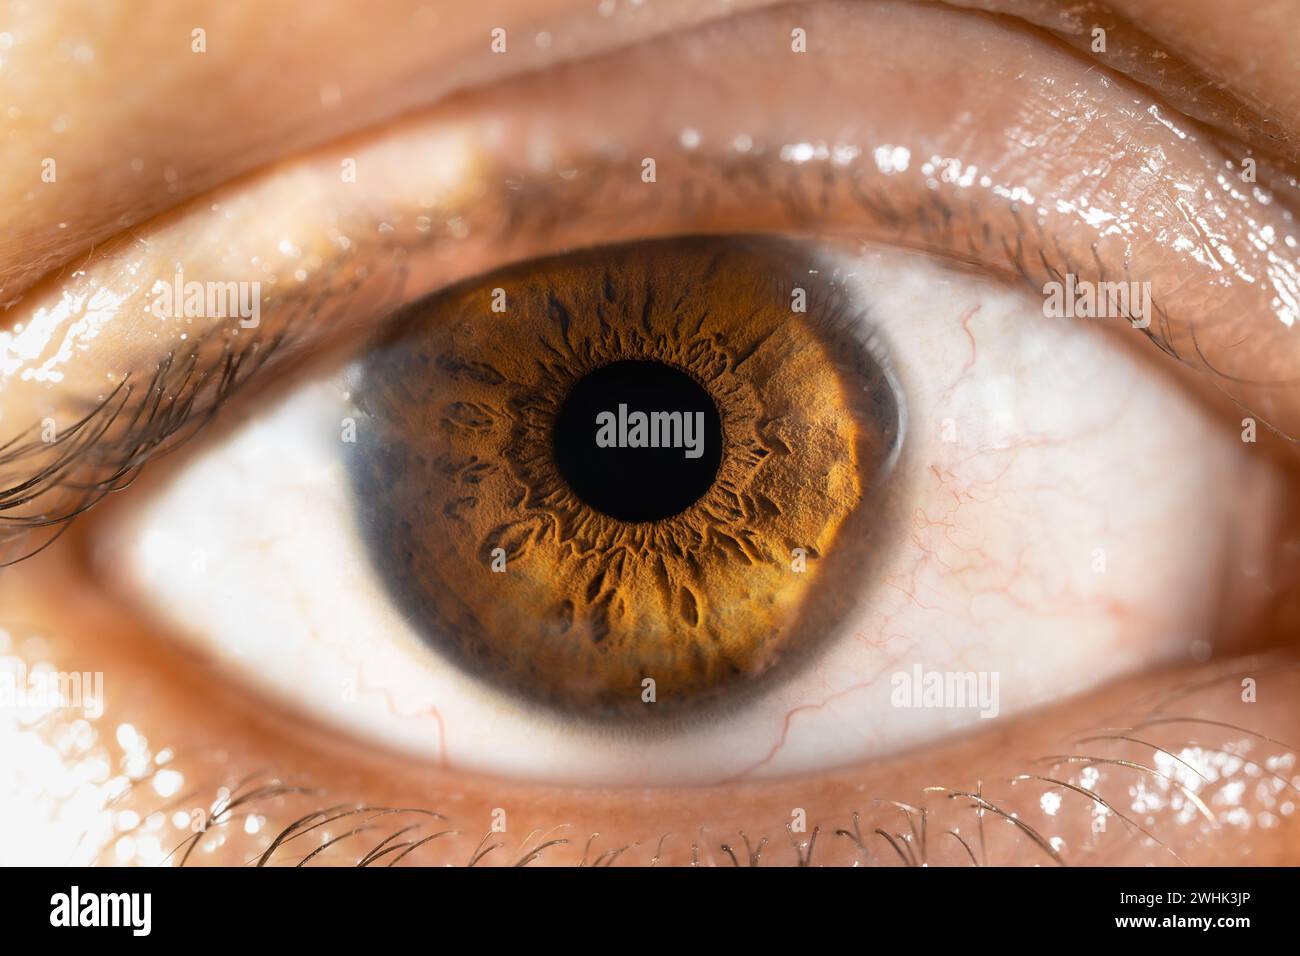 Description: Female Brown Colored Eye With Long Lashes Close Up. Structural Anatomy. Human Iris Macro Detail. Stock Photo